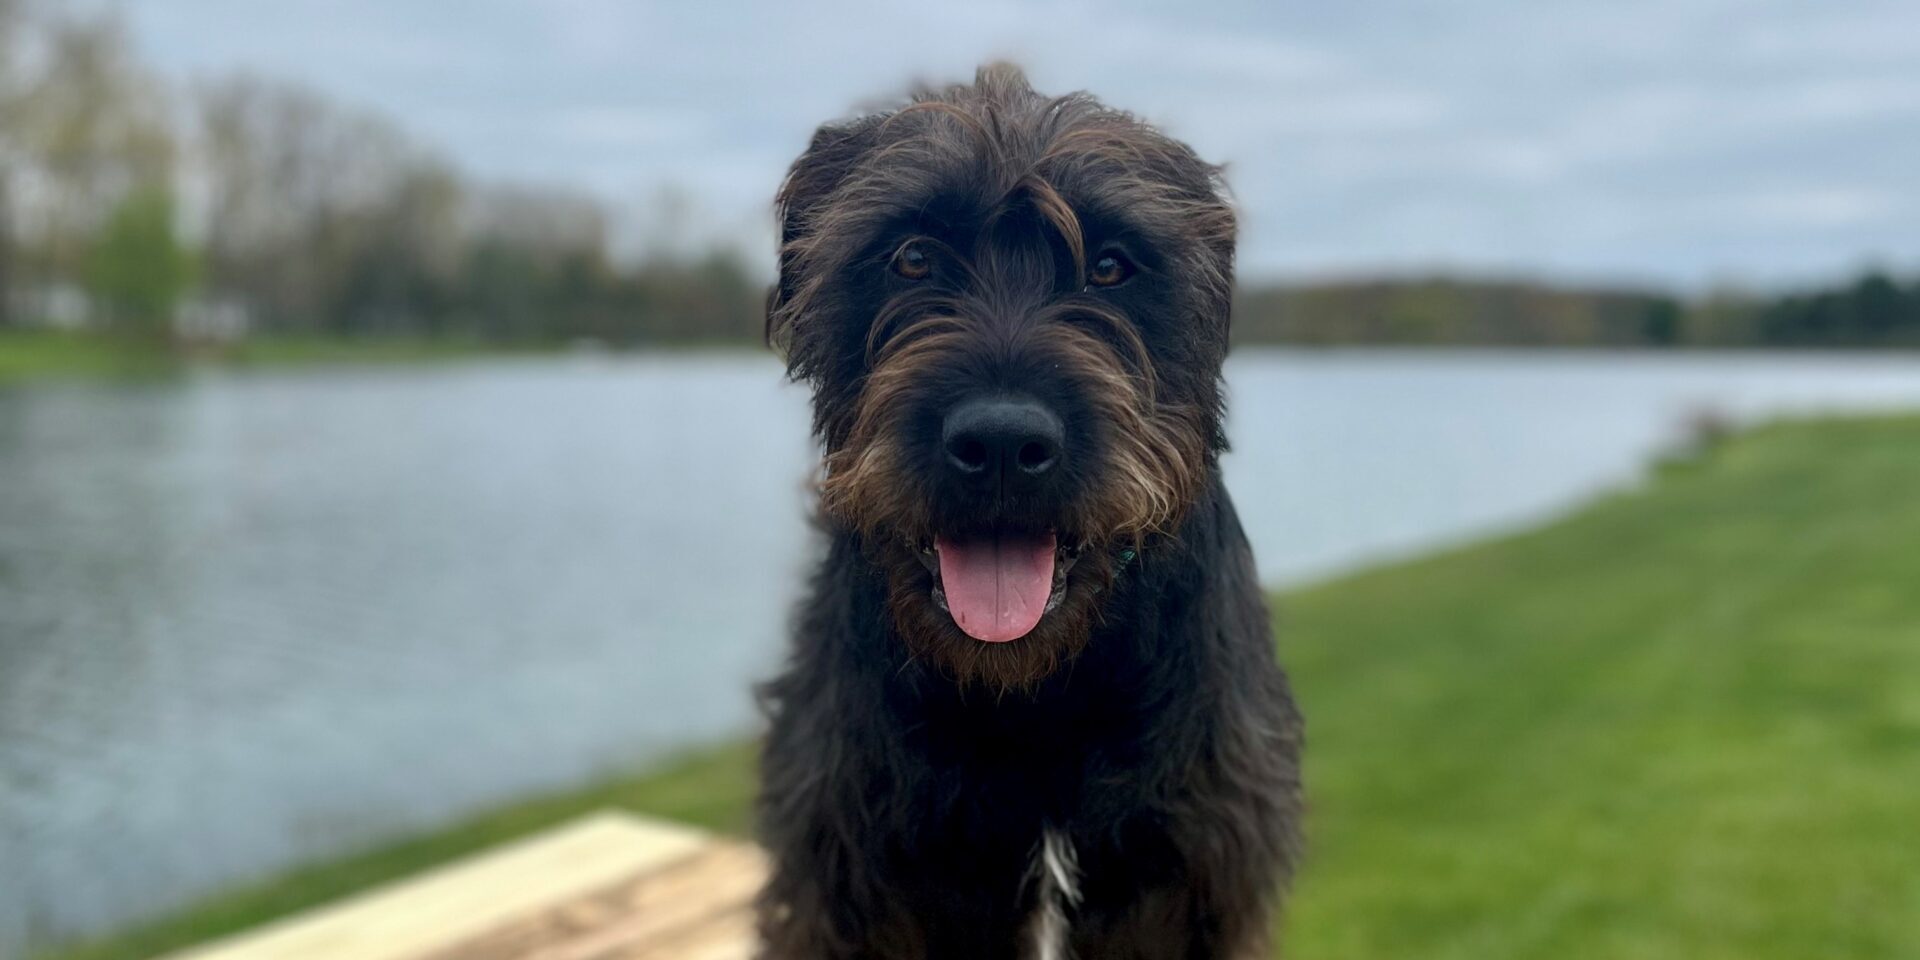 A black dog with its tongue out while sitting on a wooden dock near a lake.